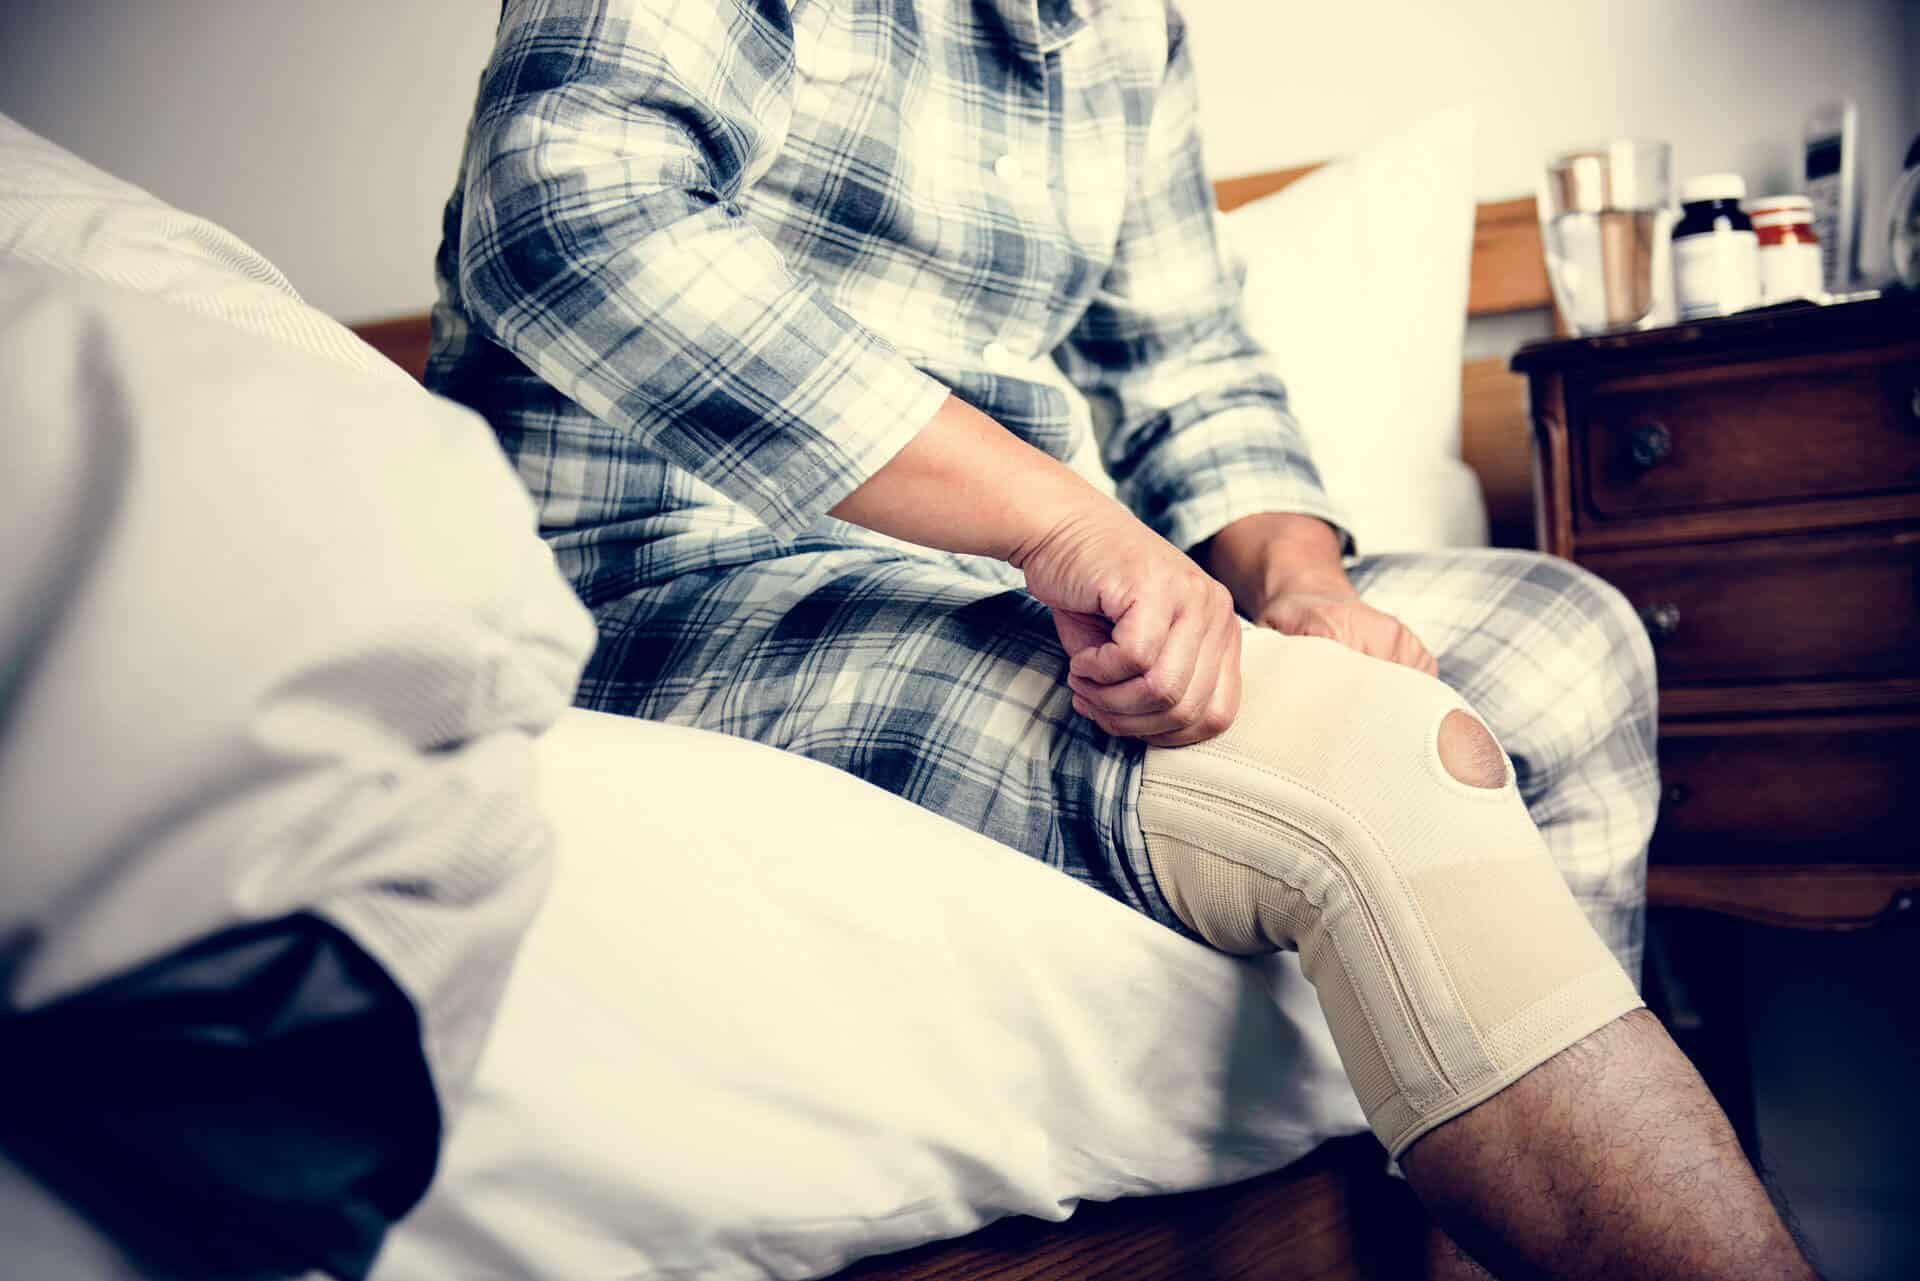 patient recovering from a Knee Replacement surgery